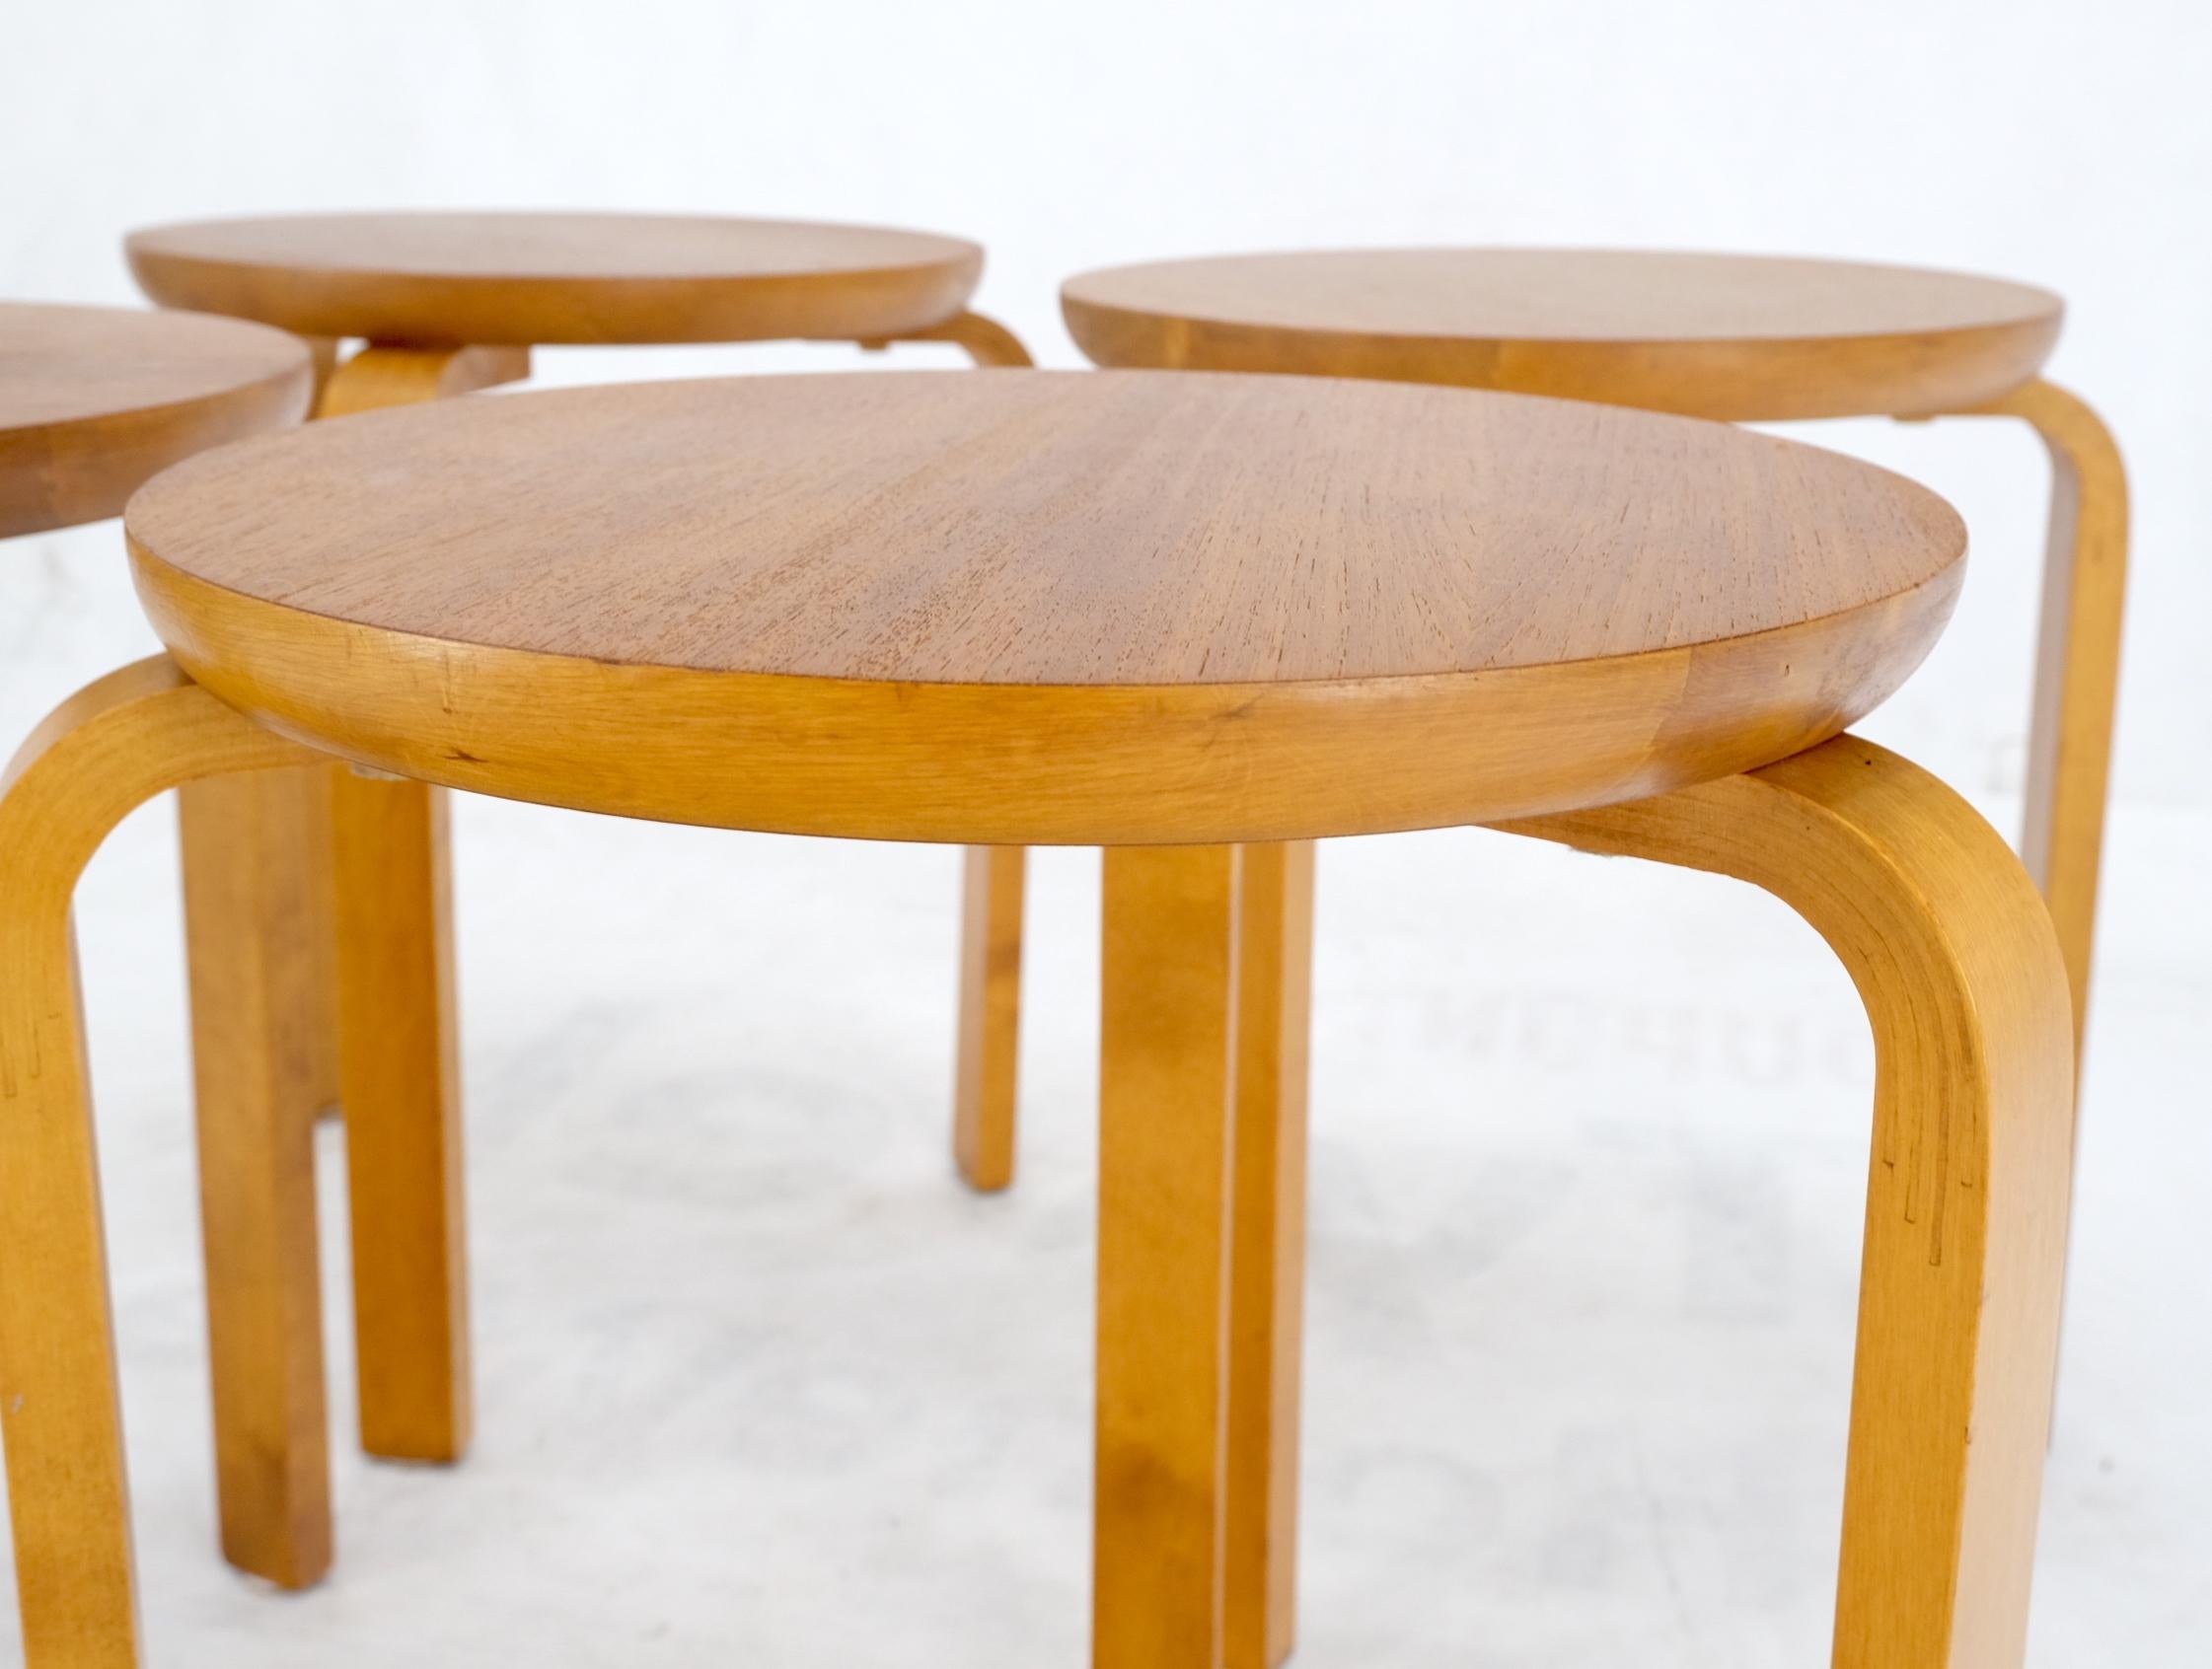 Lacquered Set of 4 Alvar Aalto Round Birch Bent Leg Nesting Tables c.1950s Made in Sweden For Sale